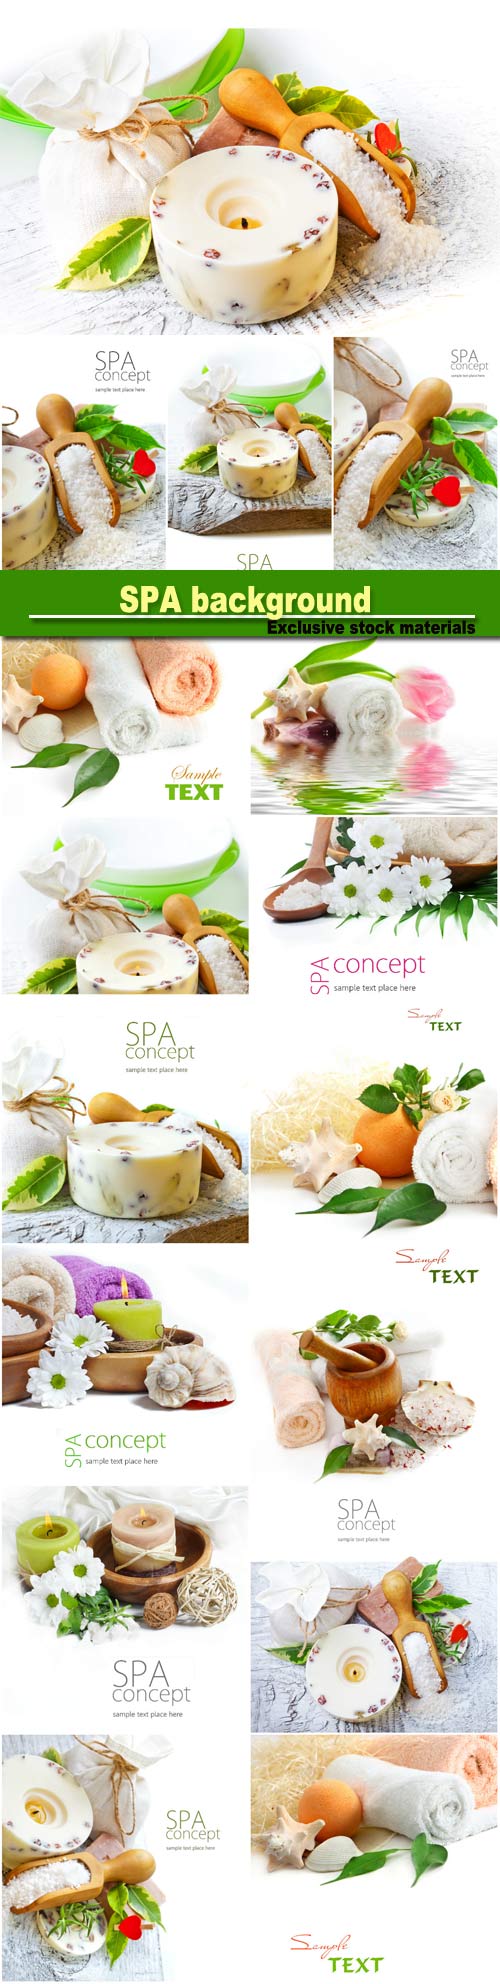 SPA background, aromatherapy, candles, flowers and sea salt